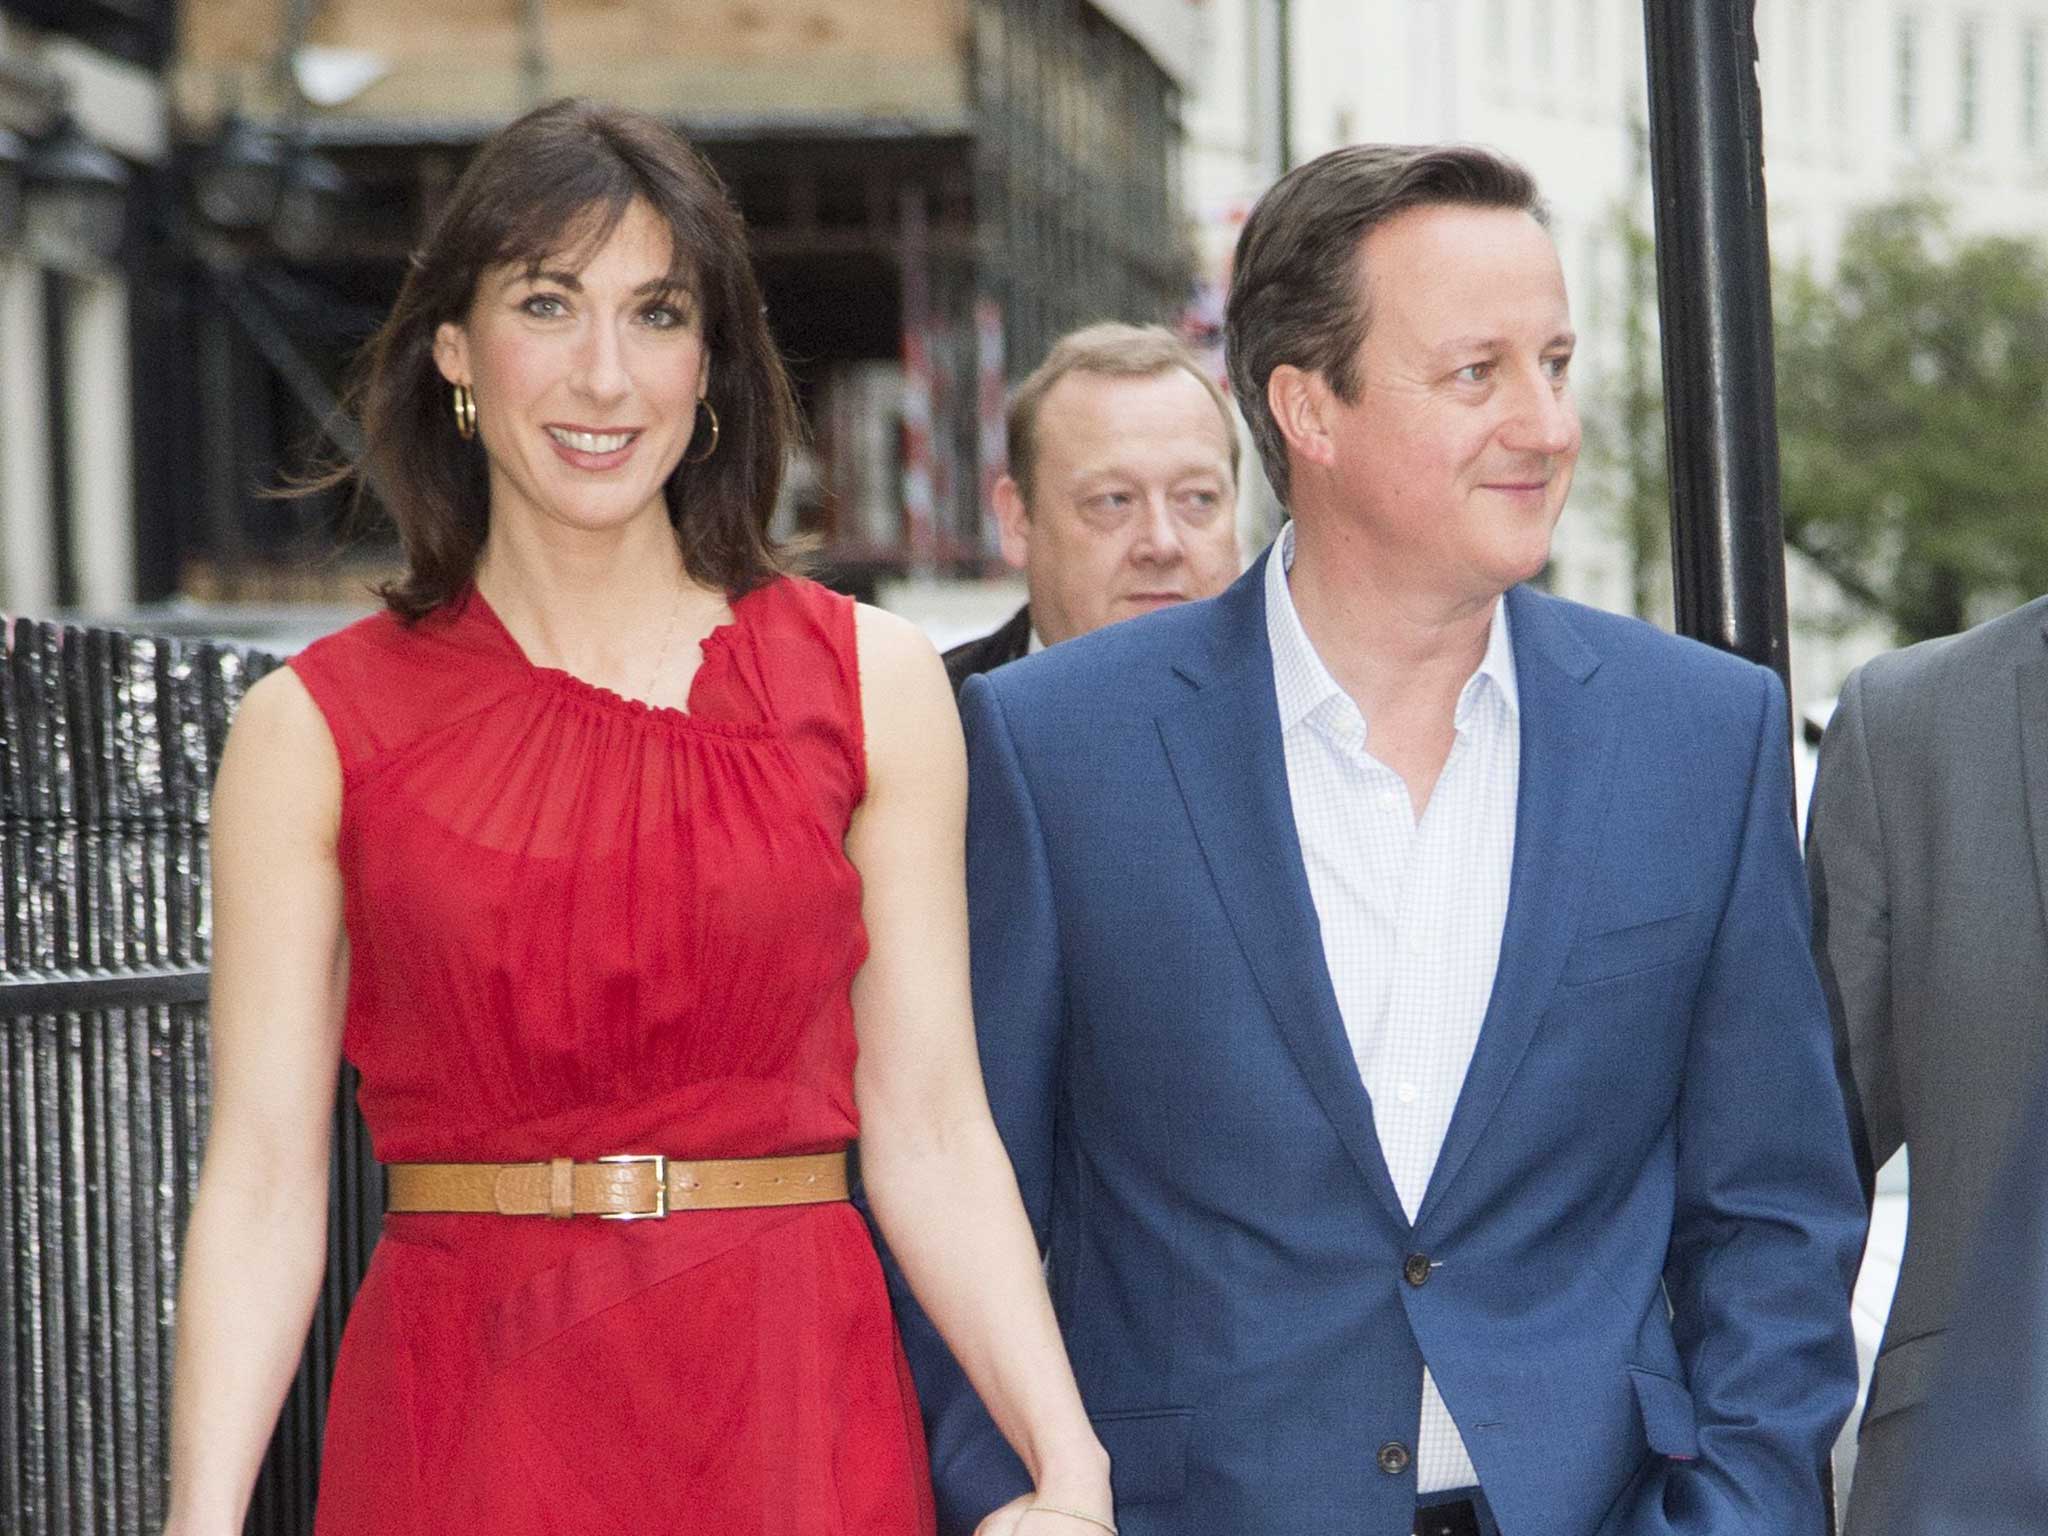 David and Samantha Cameron arrive for their meal at Mark's Club